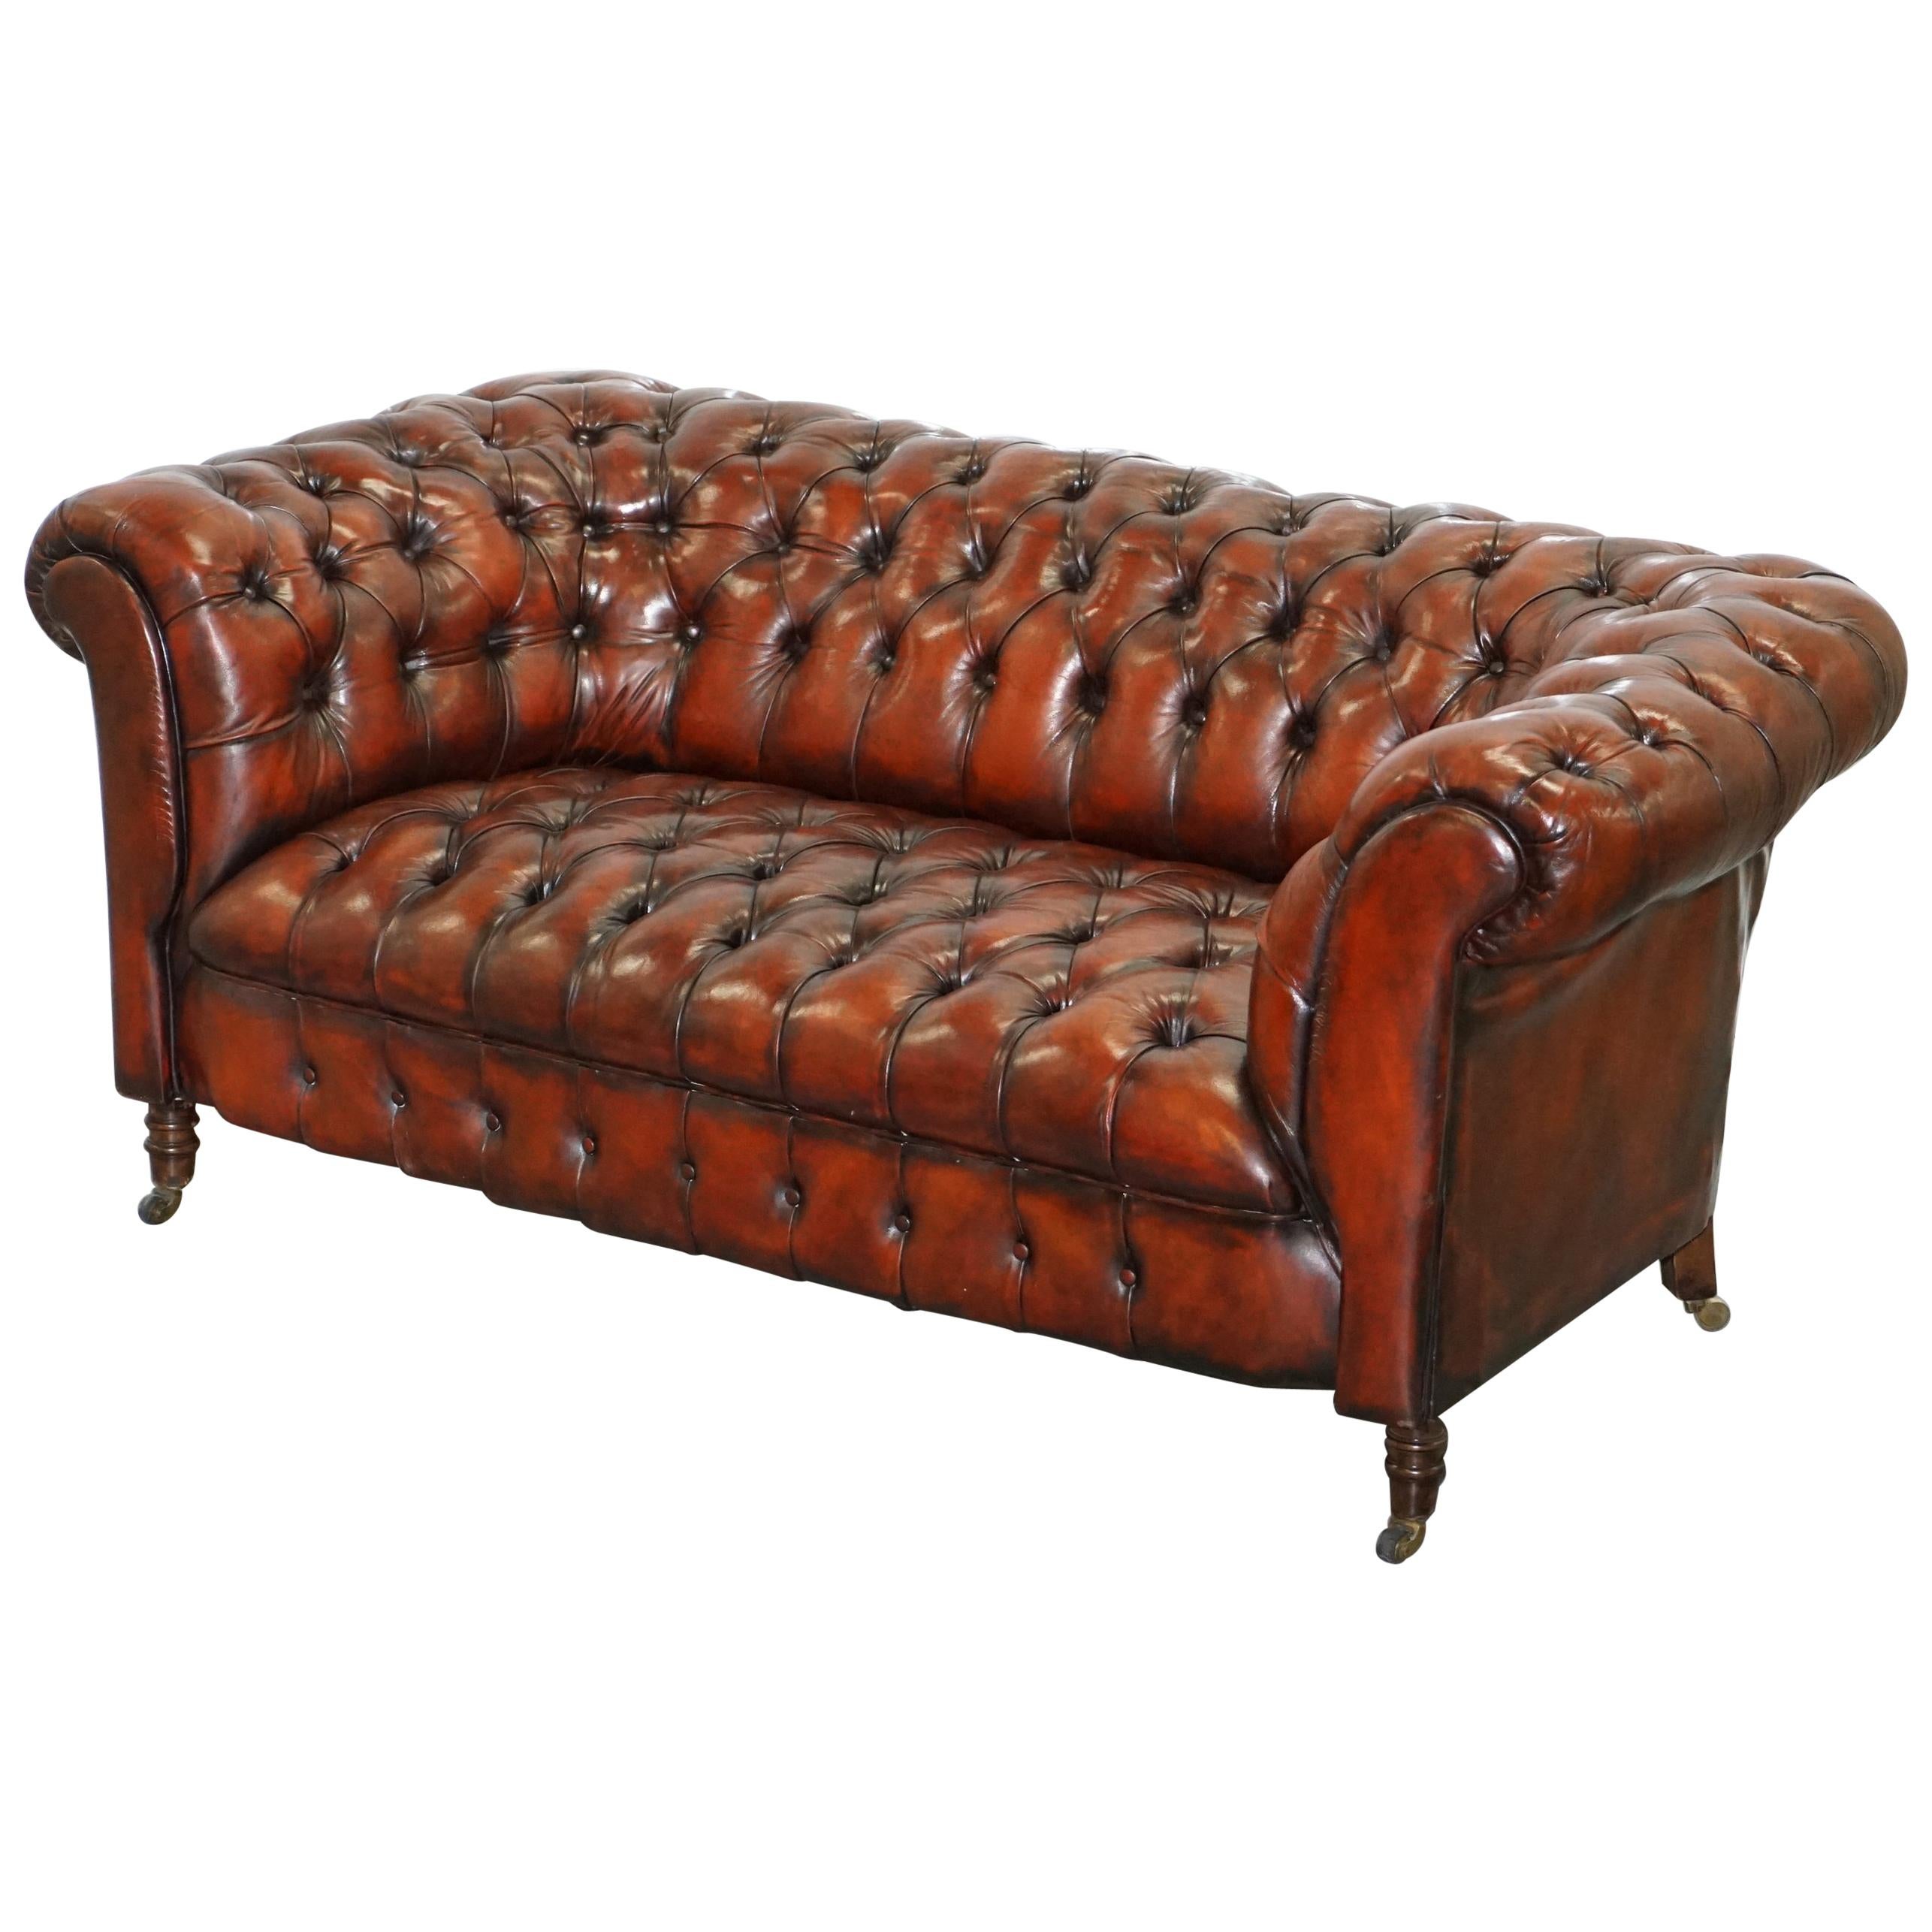 Chesterfield furniture